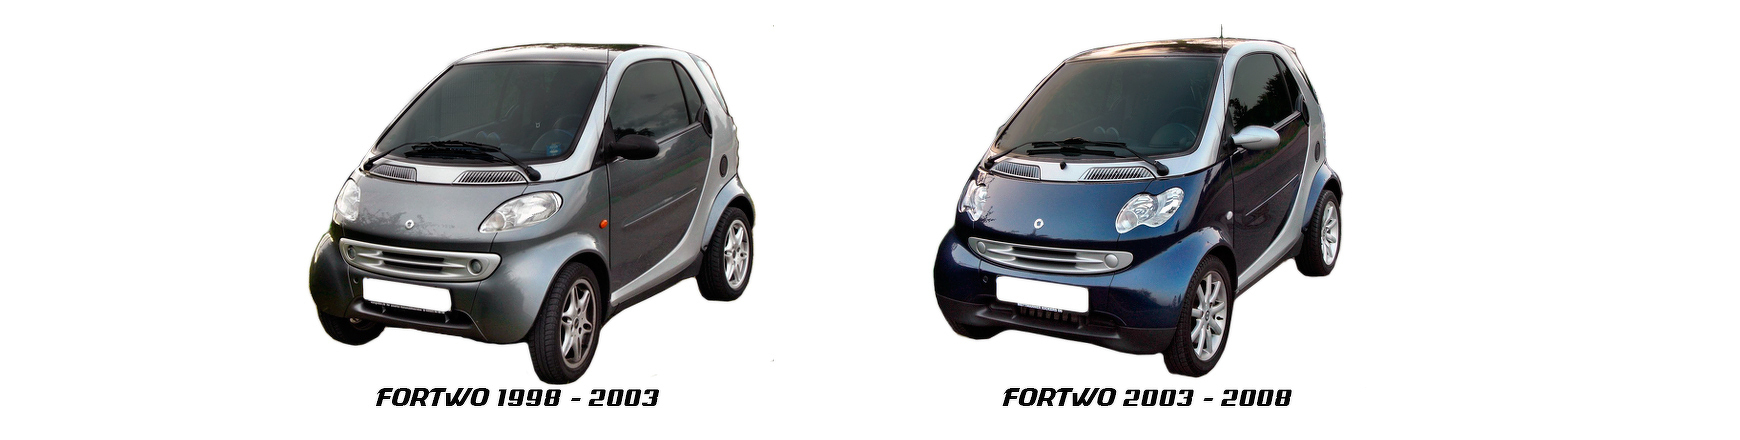 smart fortwo 1998 1999 2000 2001 2002 2003 2004 2005 2006